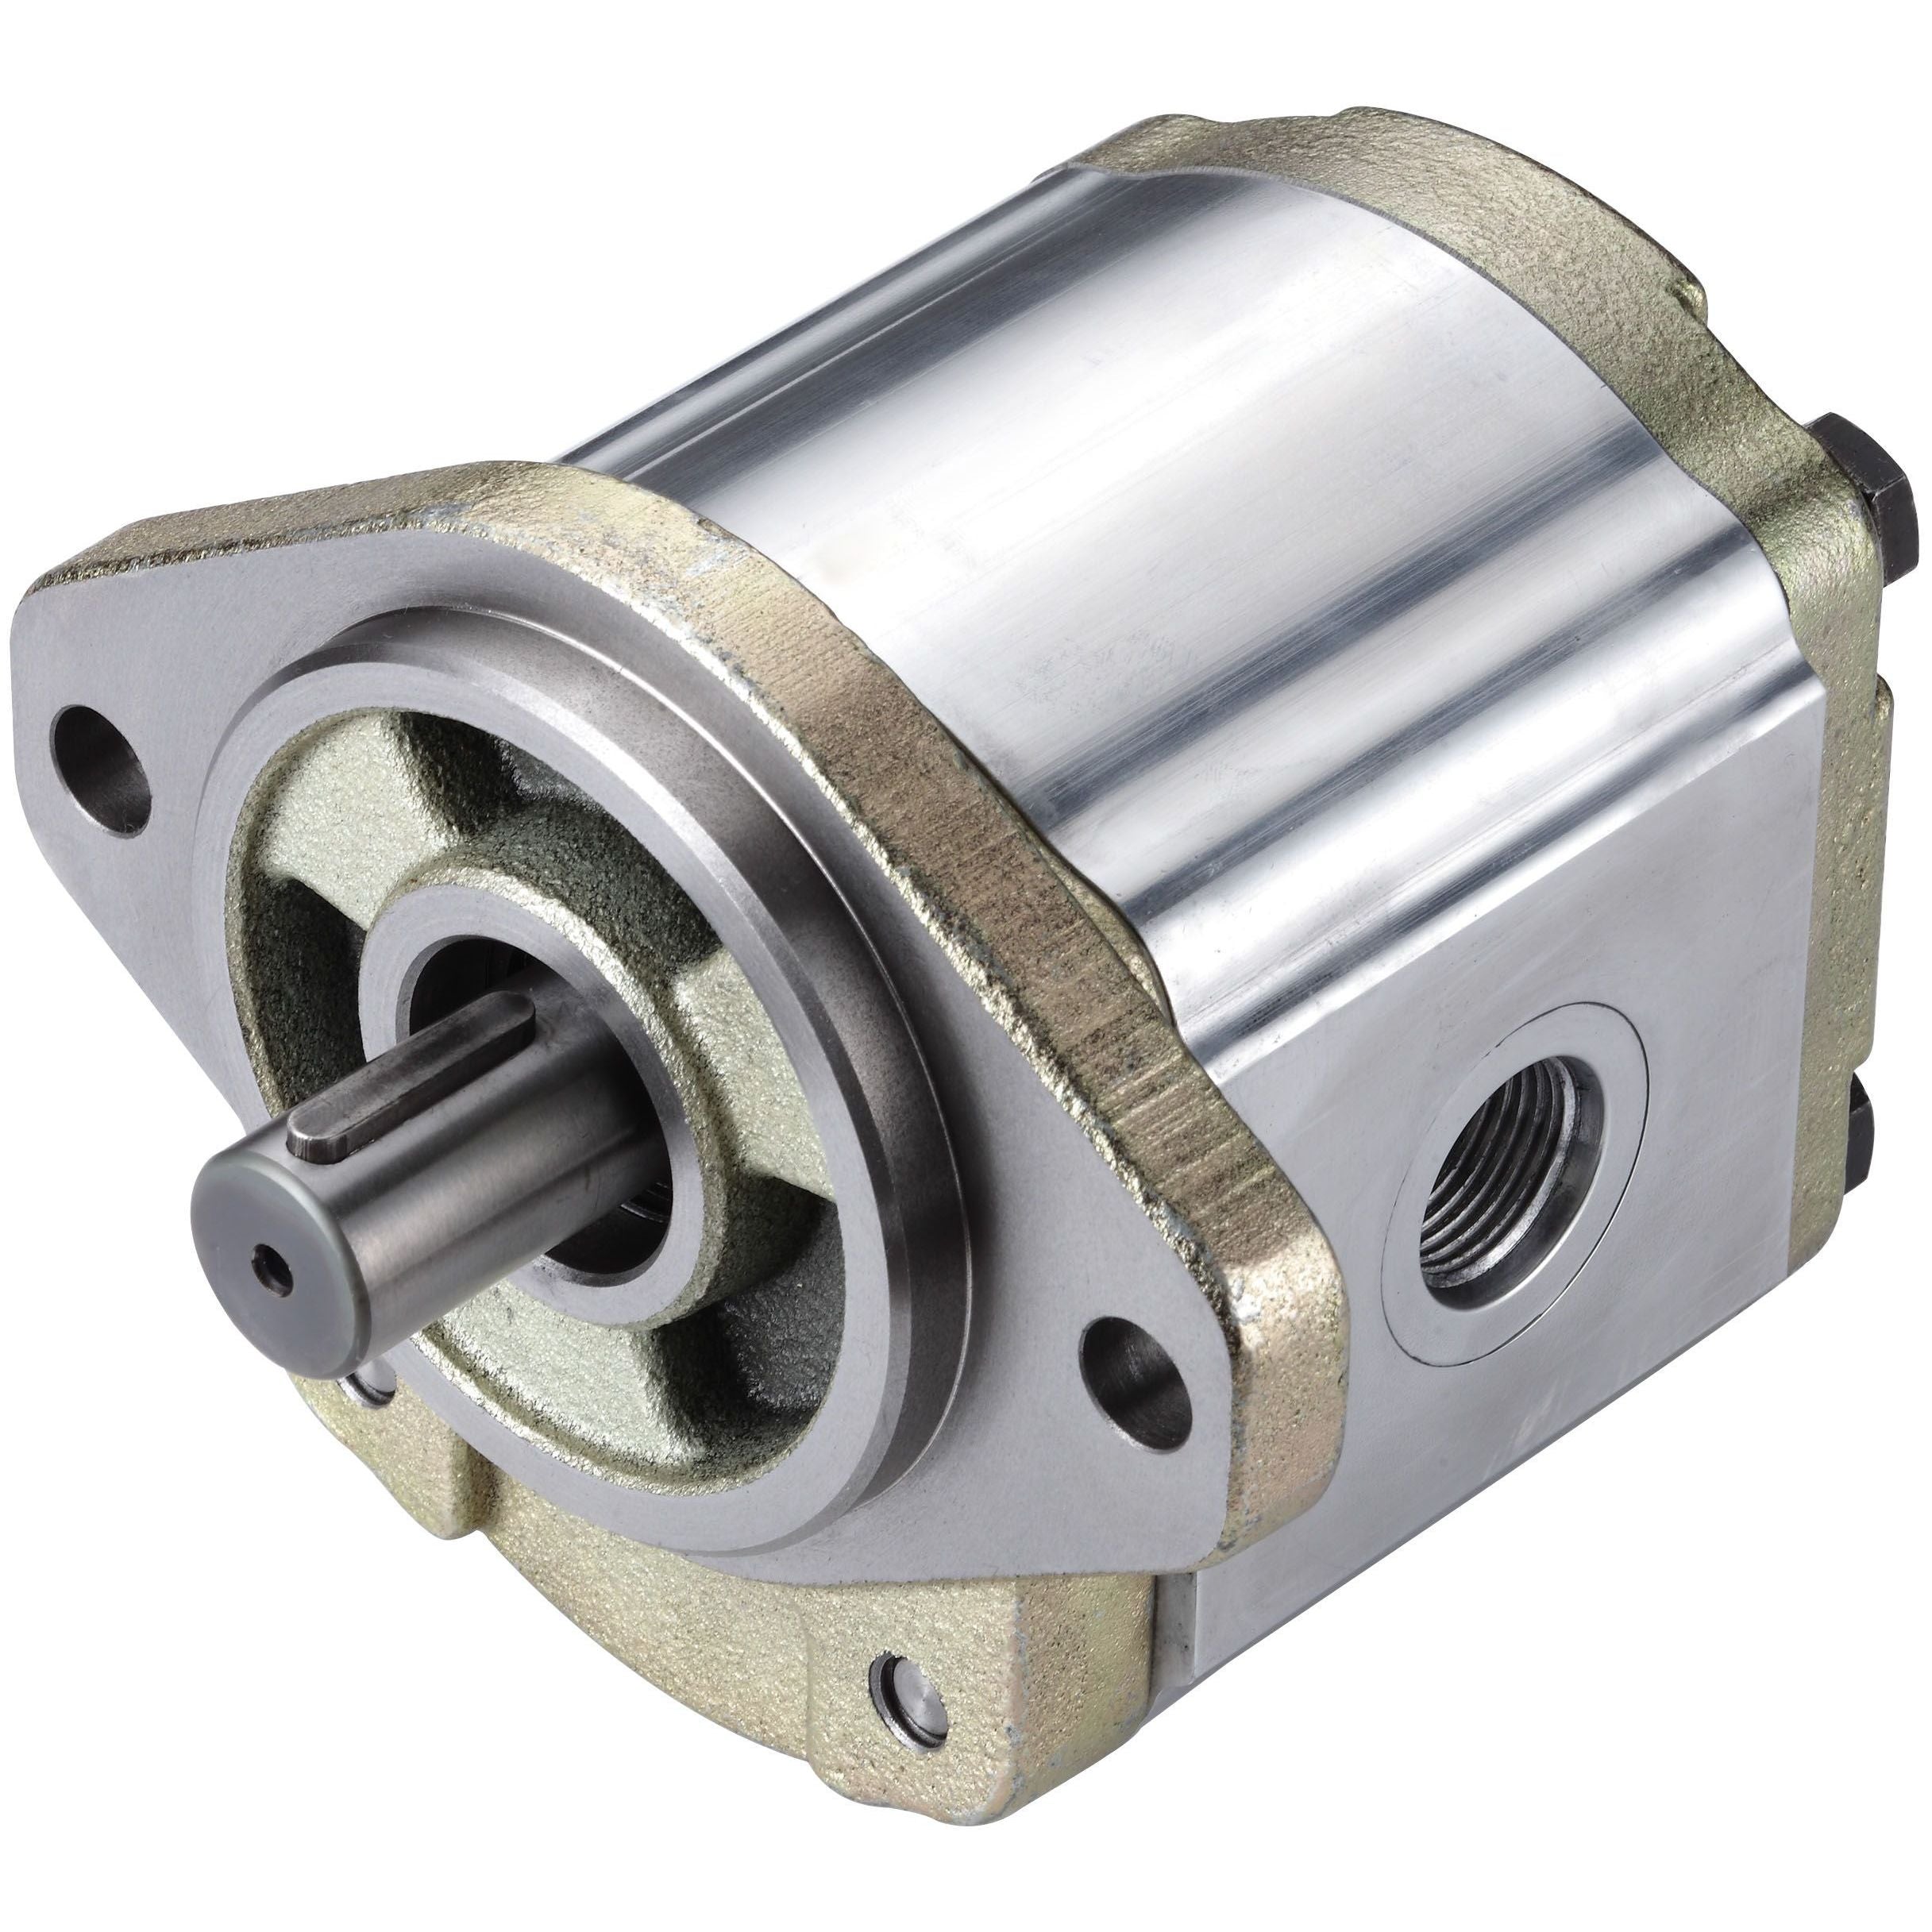 3GB8ZU370L : Honor Gear Pump, CCW Rotation, 70cc (4.27in3), 33.29 GPM, 2300psi, 2500 RPM, #20 SAE (1.25") In, #16 SAE (1") Out, Splined Shaft 13-Tooth, 16/32 Pitch, SAE B 2-Bolt Mount